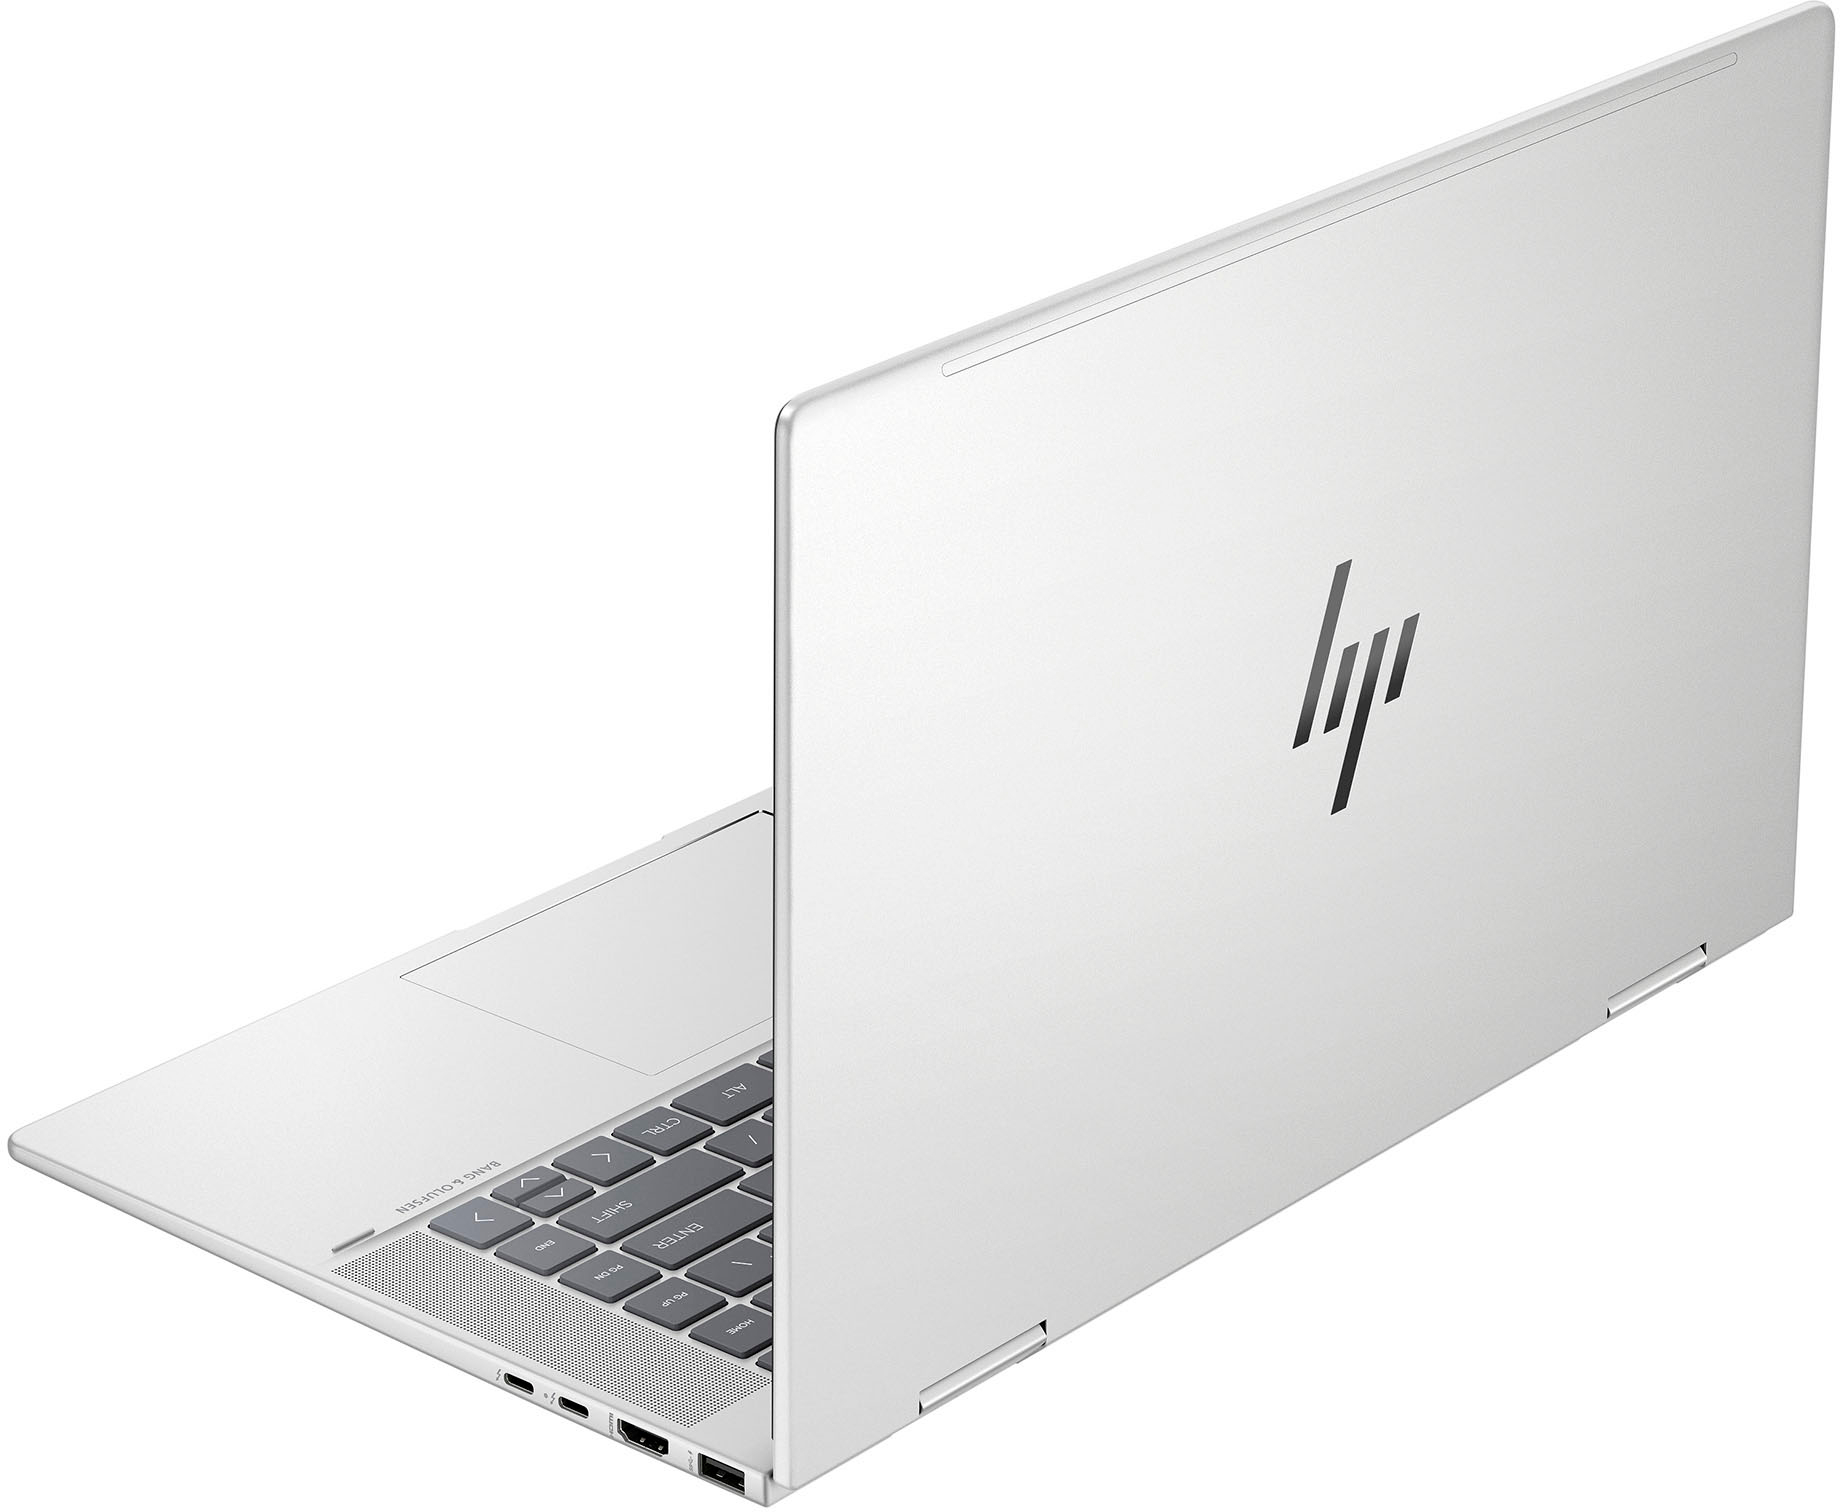 HP - ENVY 2-in-1 15.6" Full HD Touch-Screen Laptop - Intel Core i5 - 8GB Memory - 256GB SSD - Natural Silver